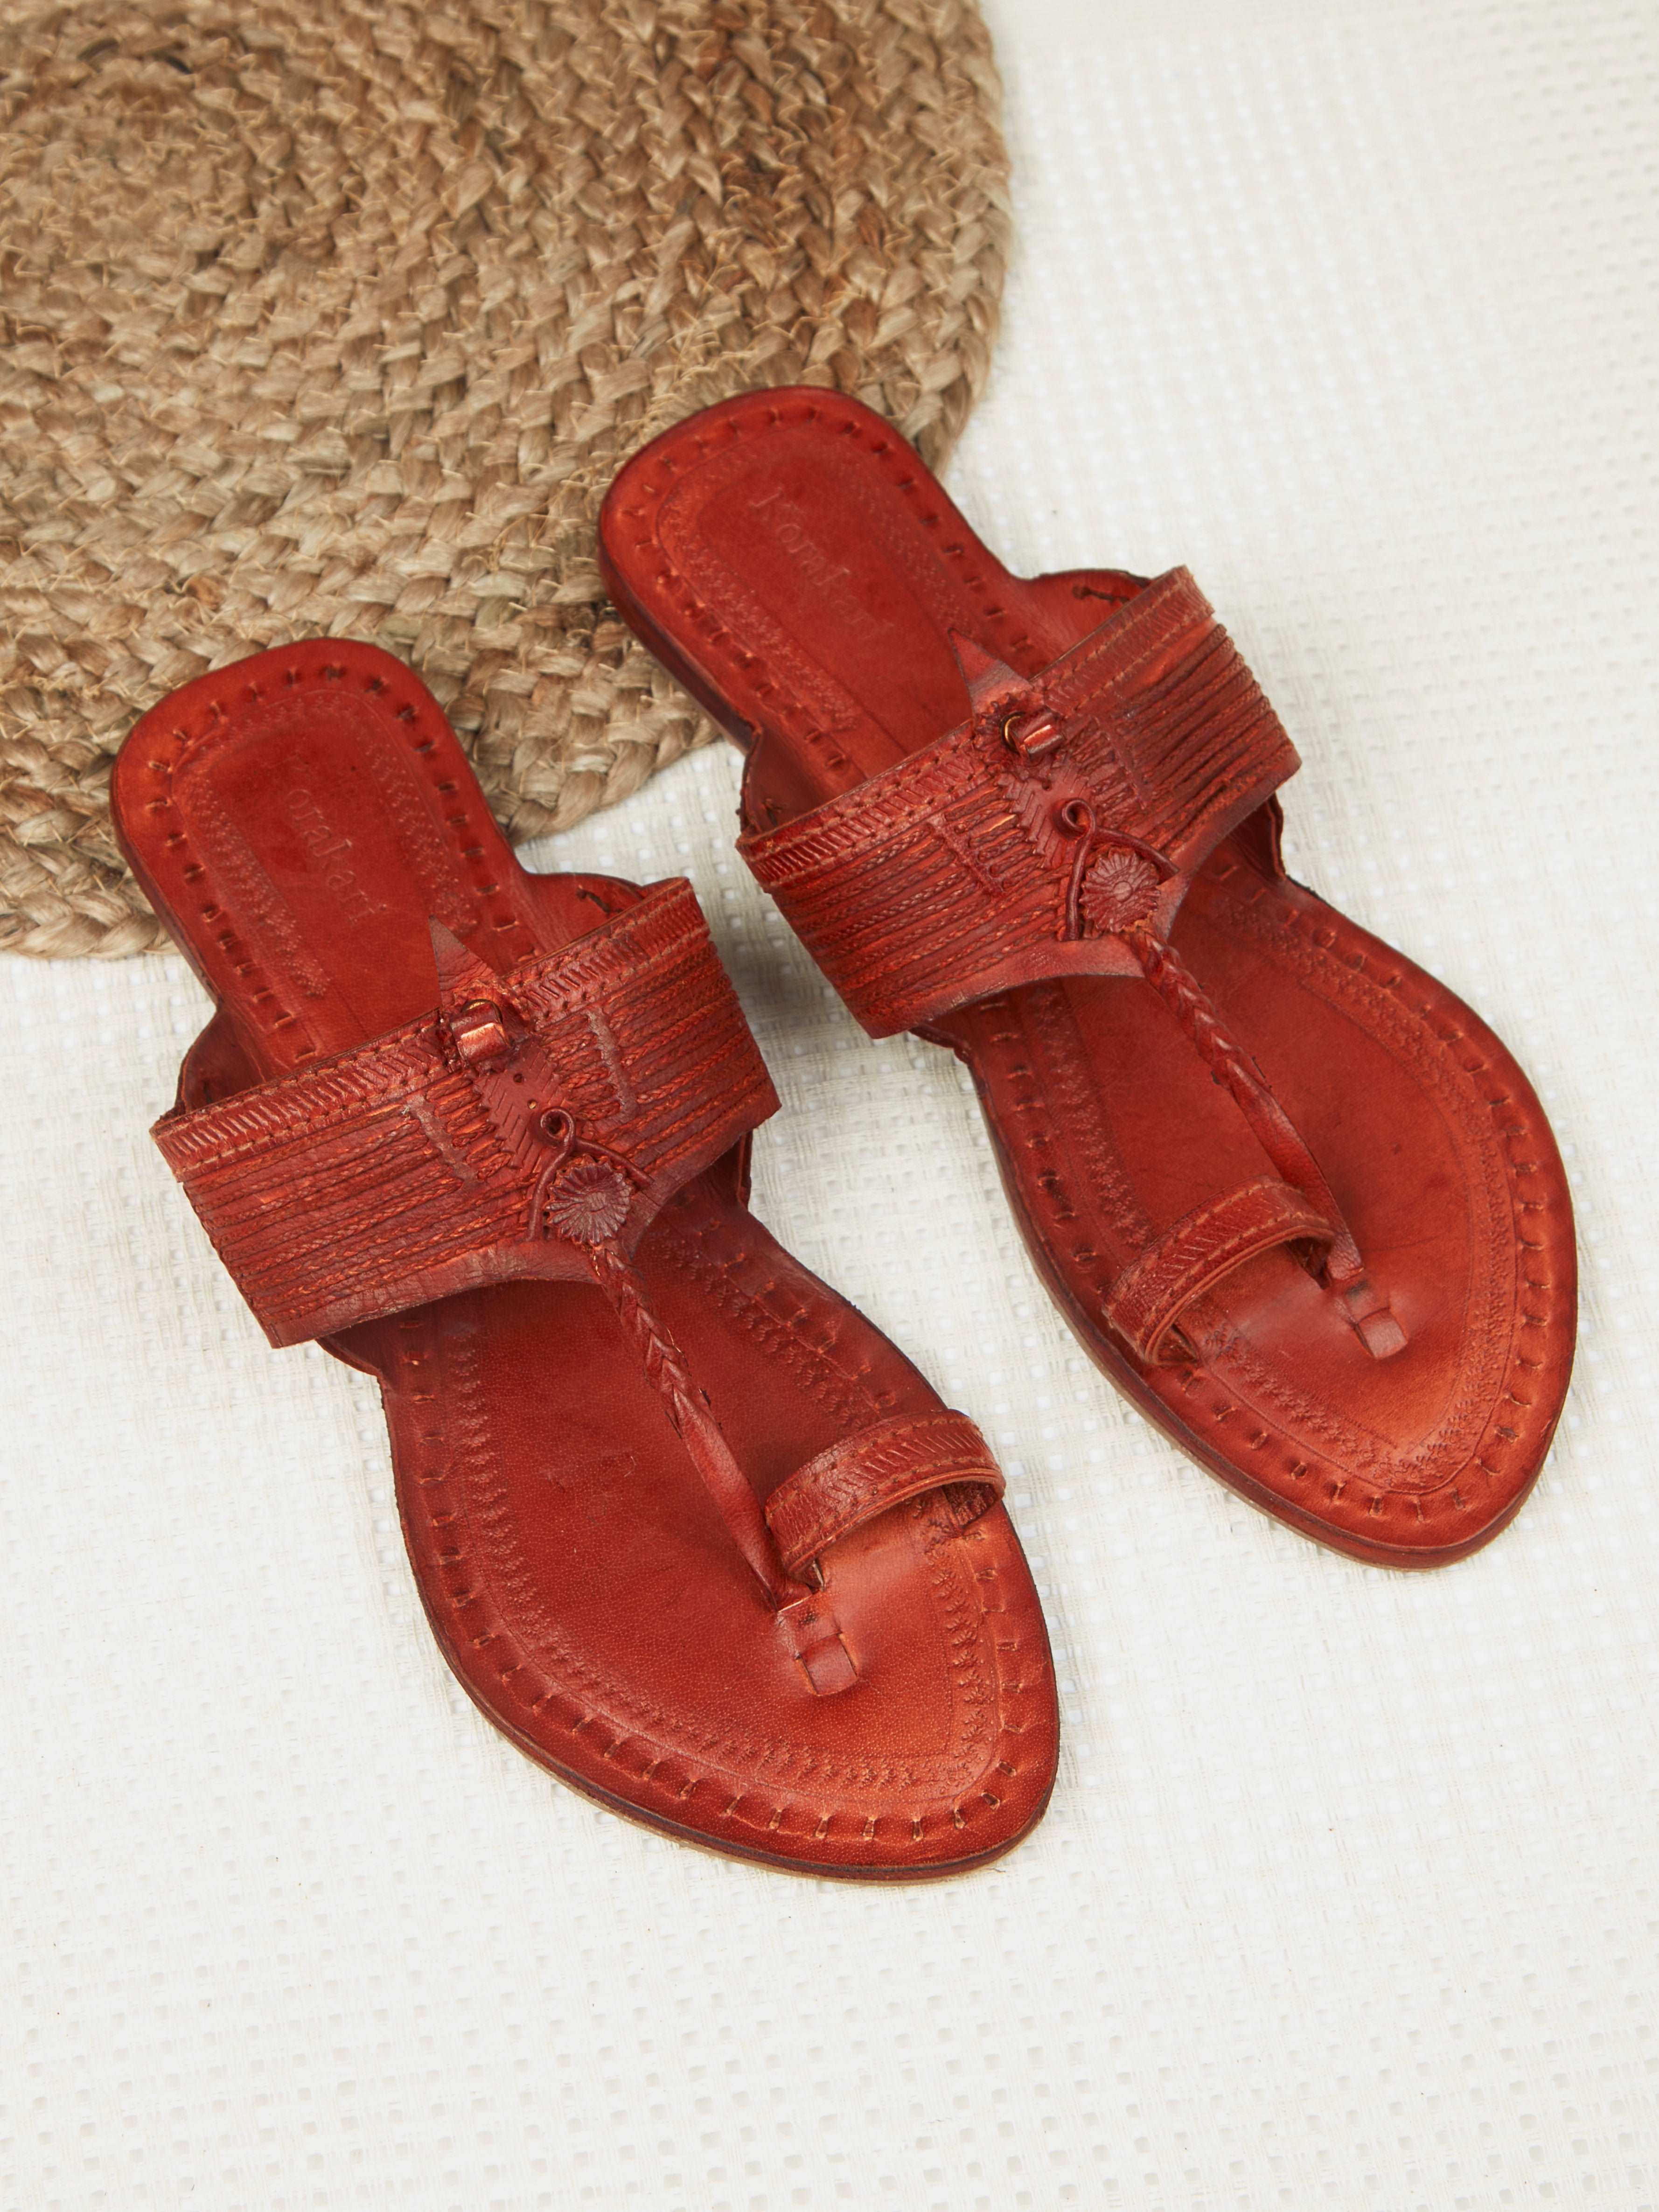 Back to our Roots -best kolhapuri chappal for women